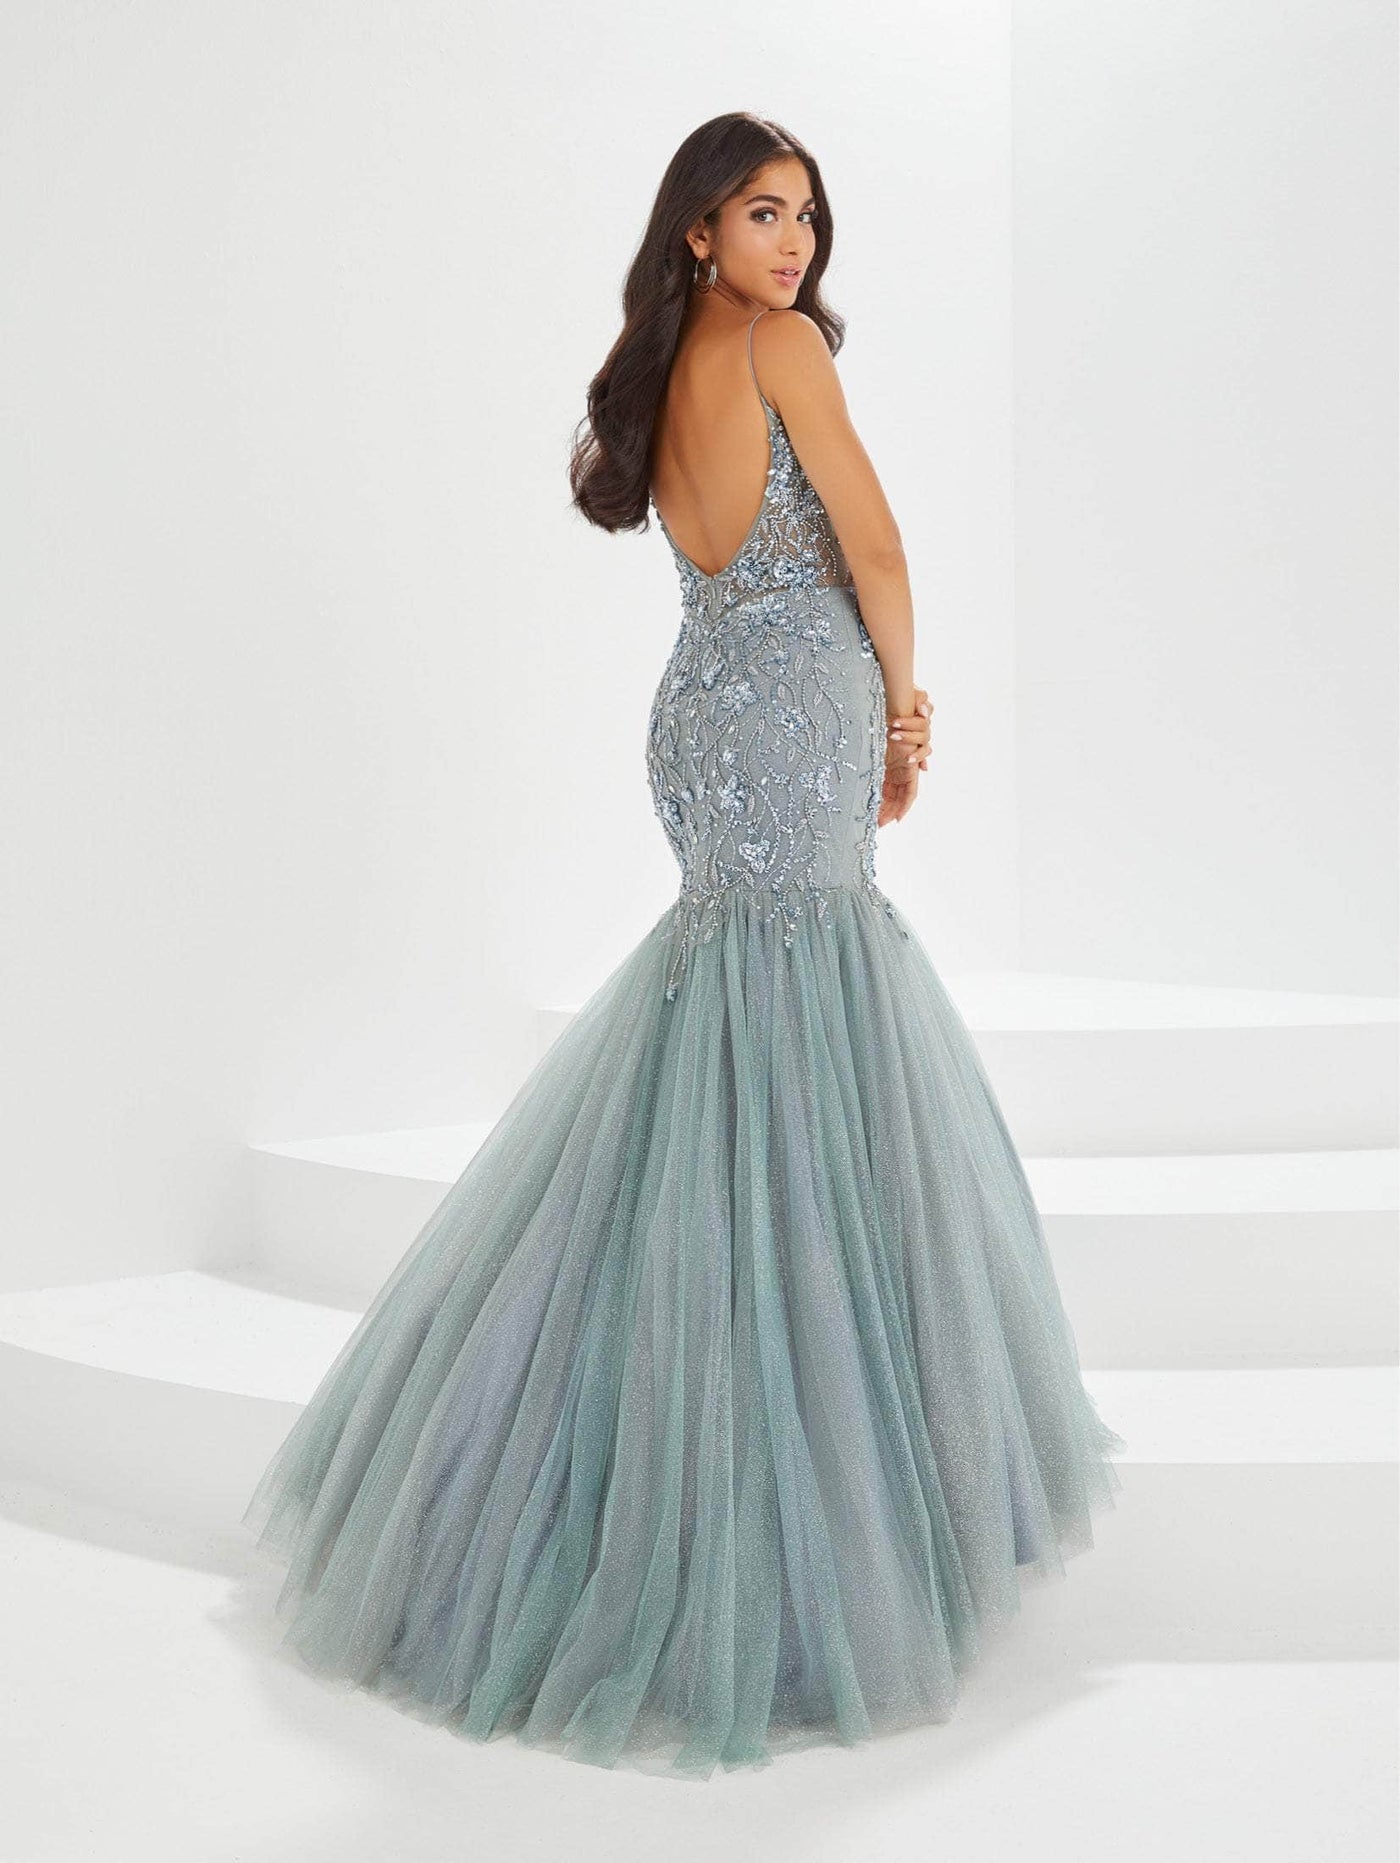 Tiffany Designs by Christina Wu 16025 - Mermaid Tulle Prom Gown Special Occasion Dress